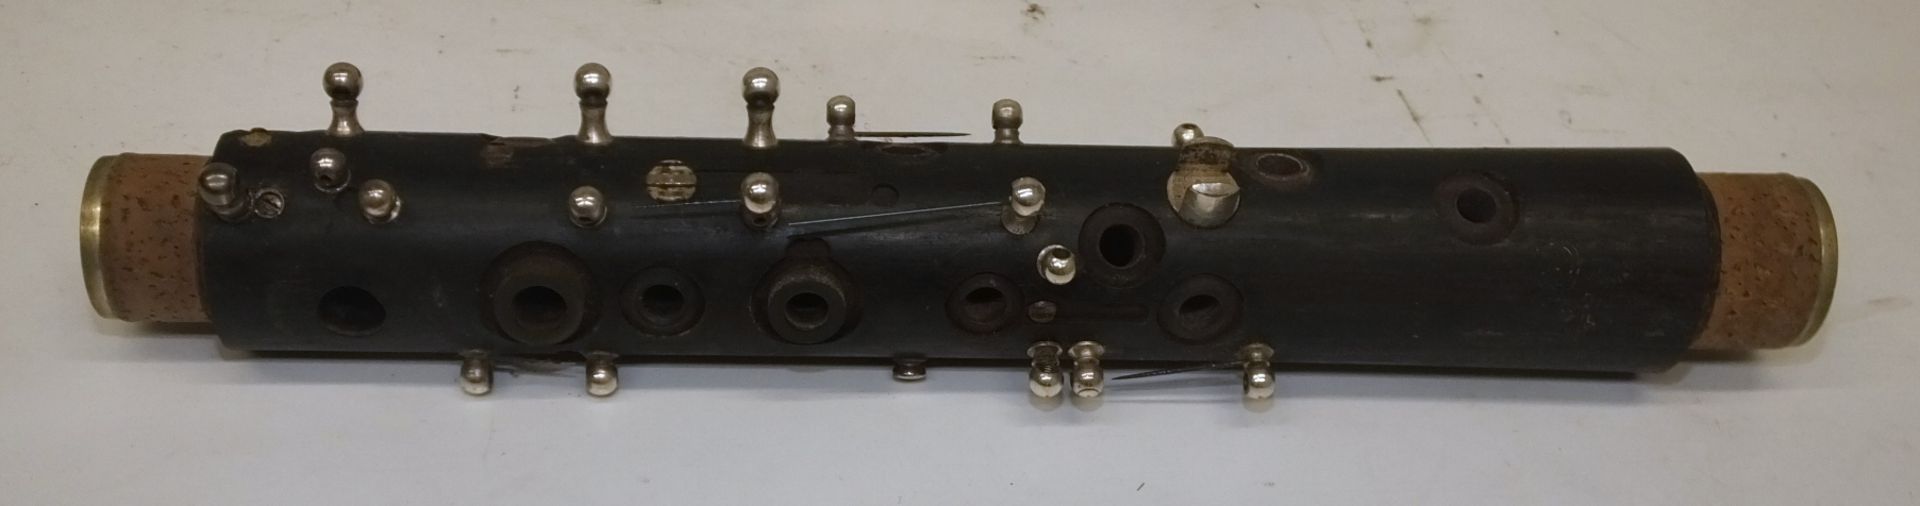 Boosey & Hawkes Imperial 926 Clarinet - Serial Number - 504212 (as spares) - Image 7 of 15